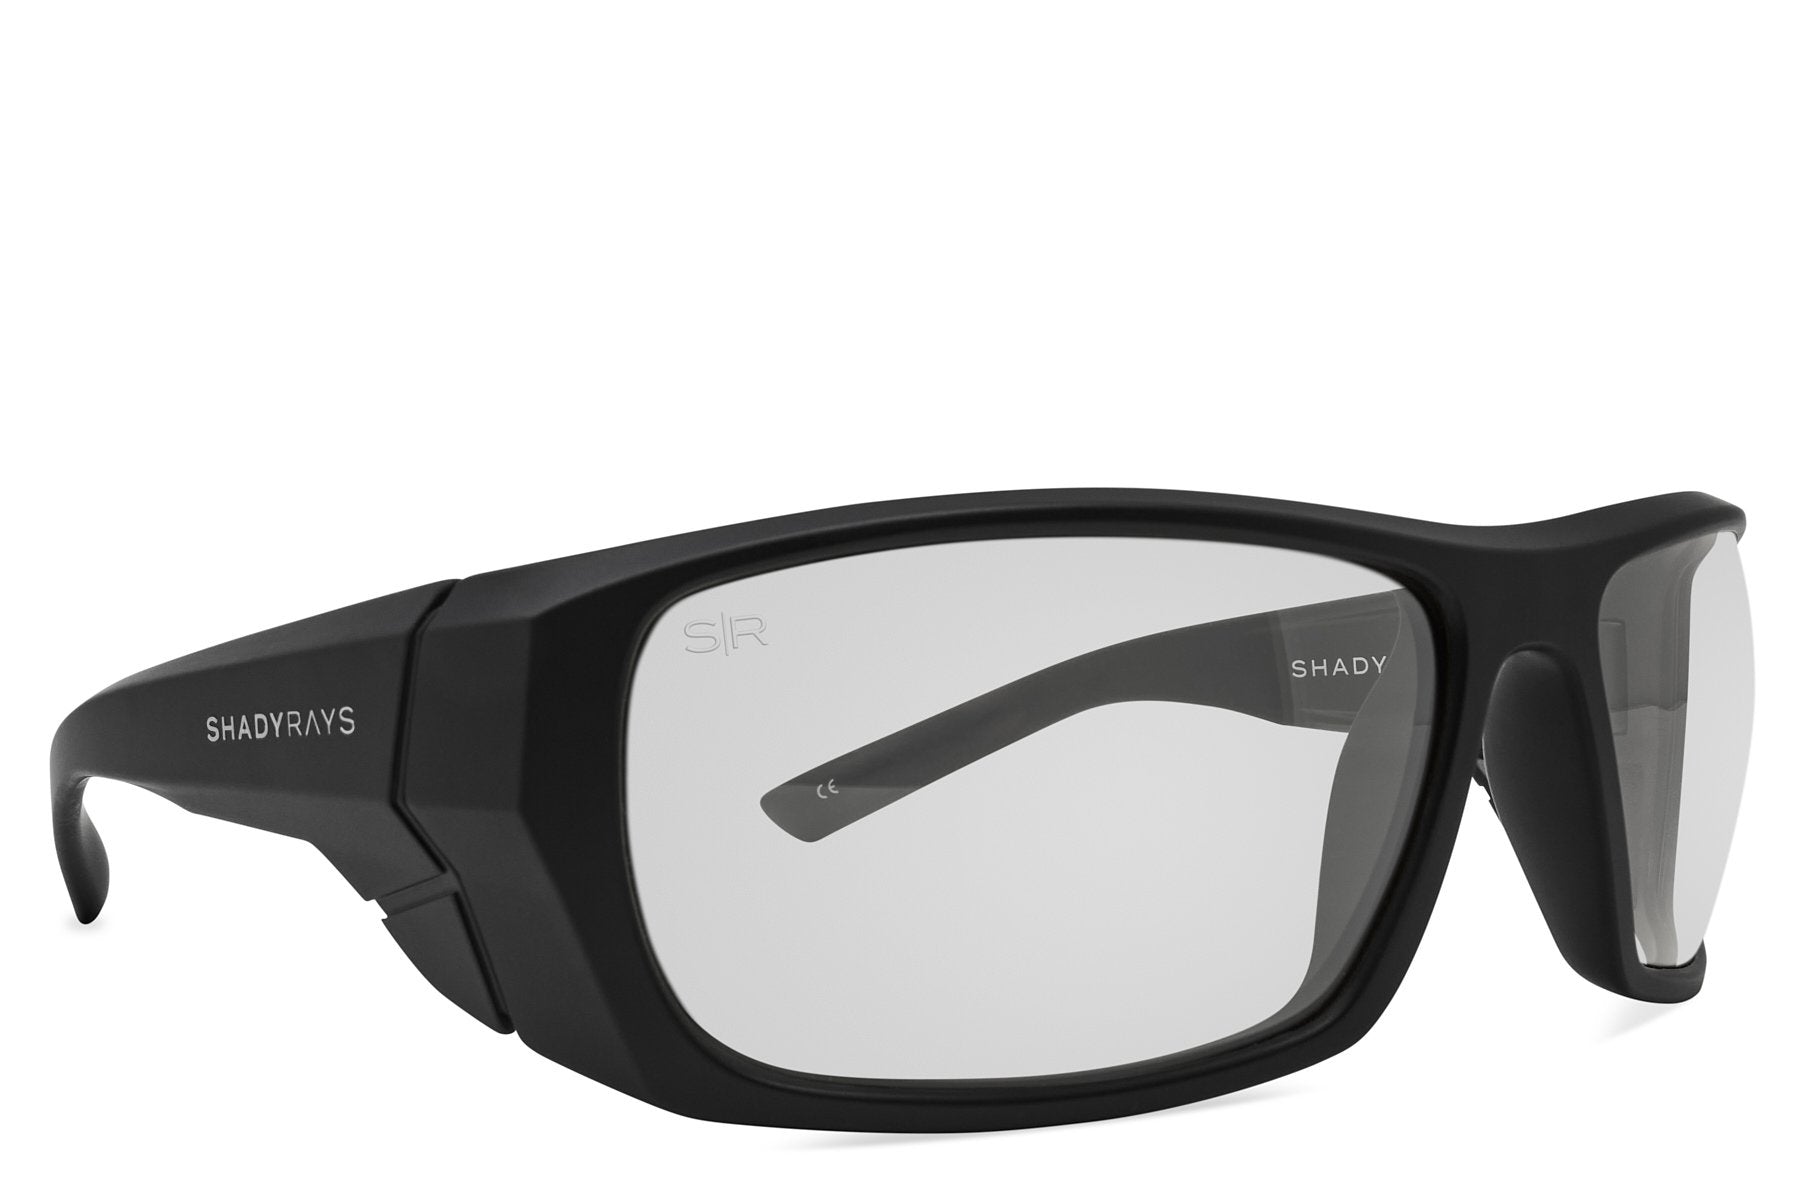 Terrain - Clear Sunglasses | Matte Black Sunglasses | Best Christmas Gifts | Gifts for The Holidays | Unique Gifts for Friends| Shady Rays